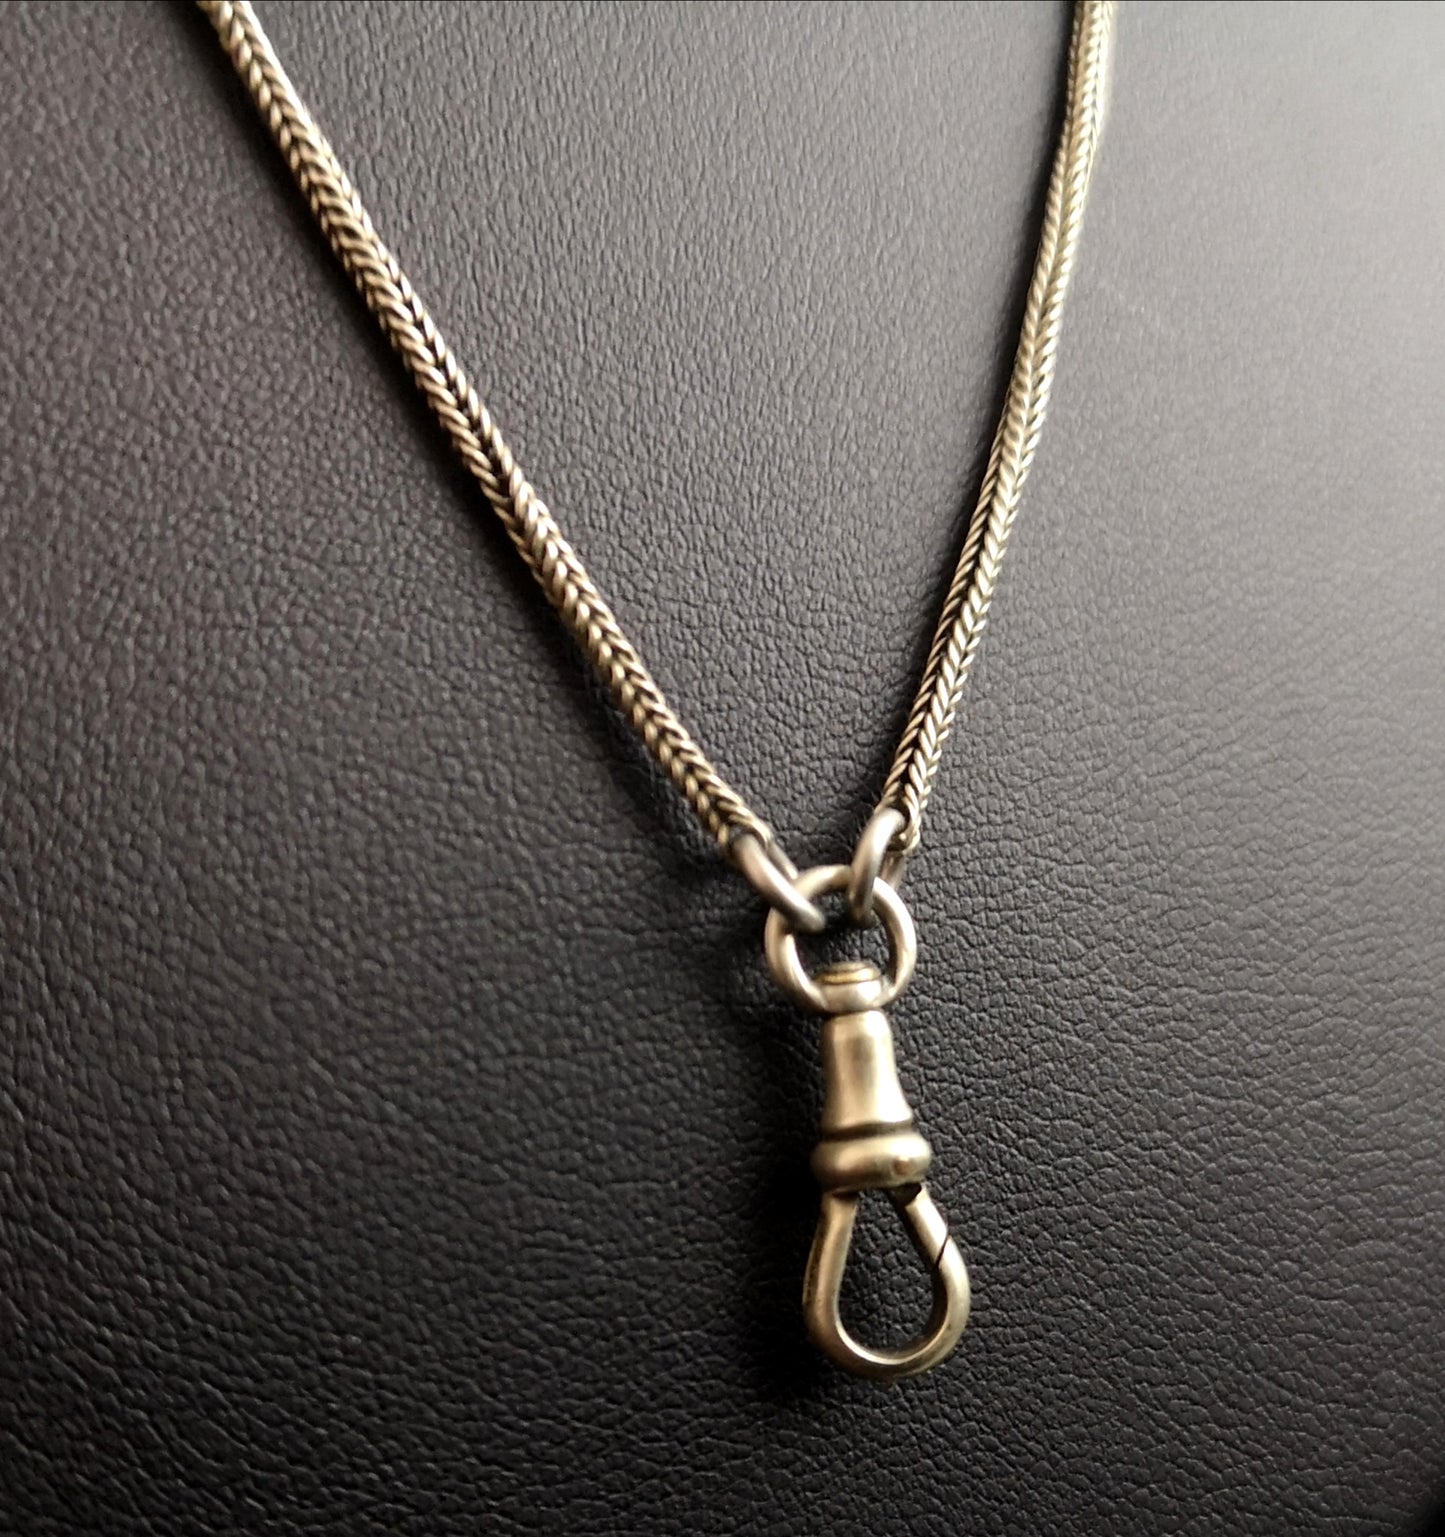 Victorian longuard chain, muff chain necklace, silver plated